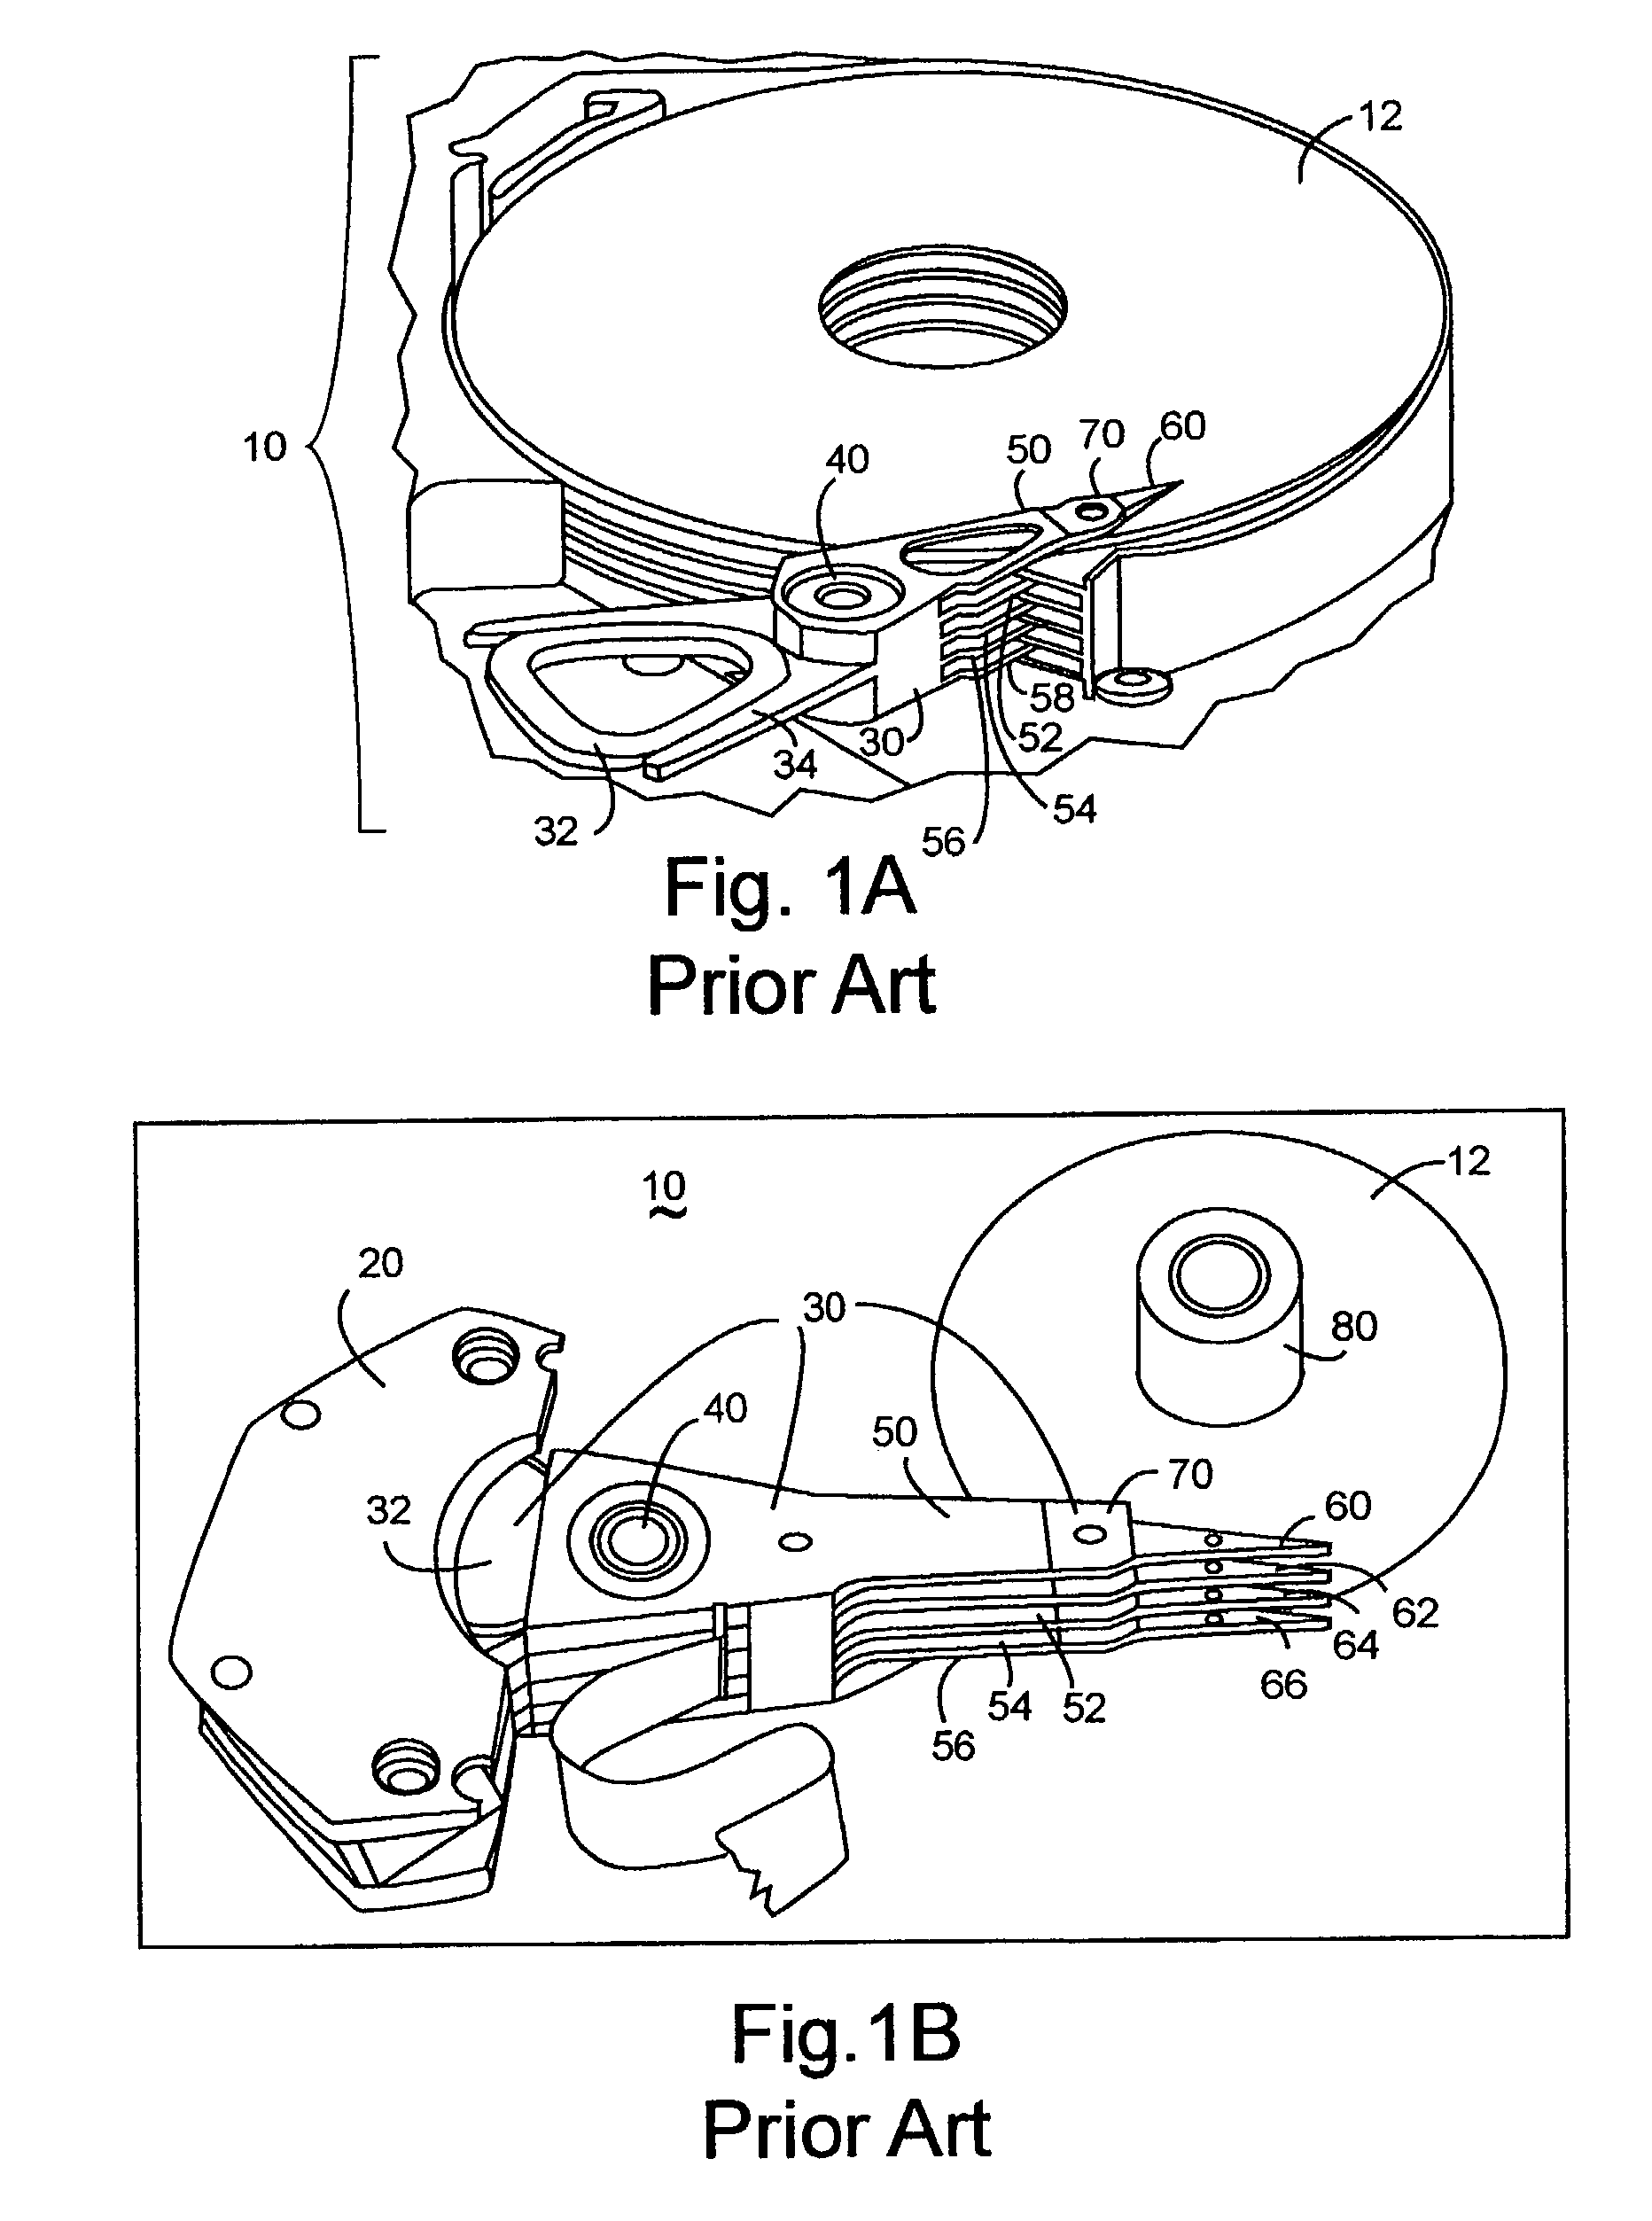 Methods and apparatus determining and/or using overshoot control of write current for optimized head write control in assembled disk drives